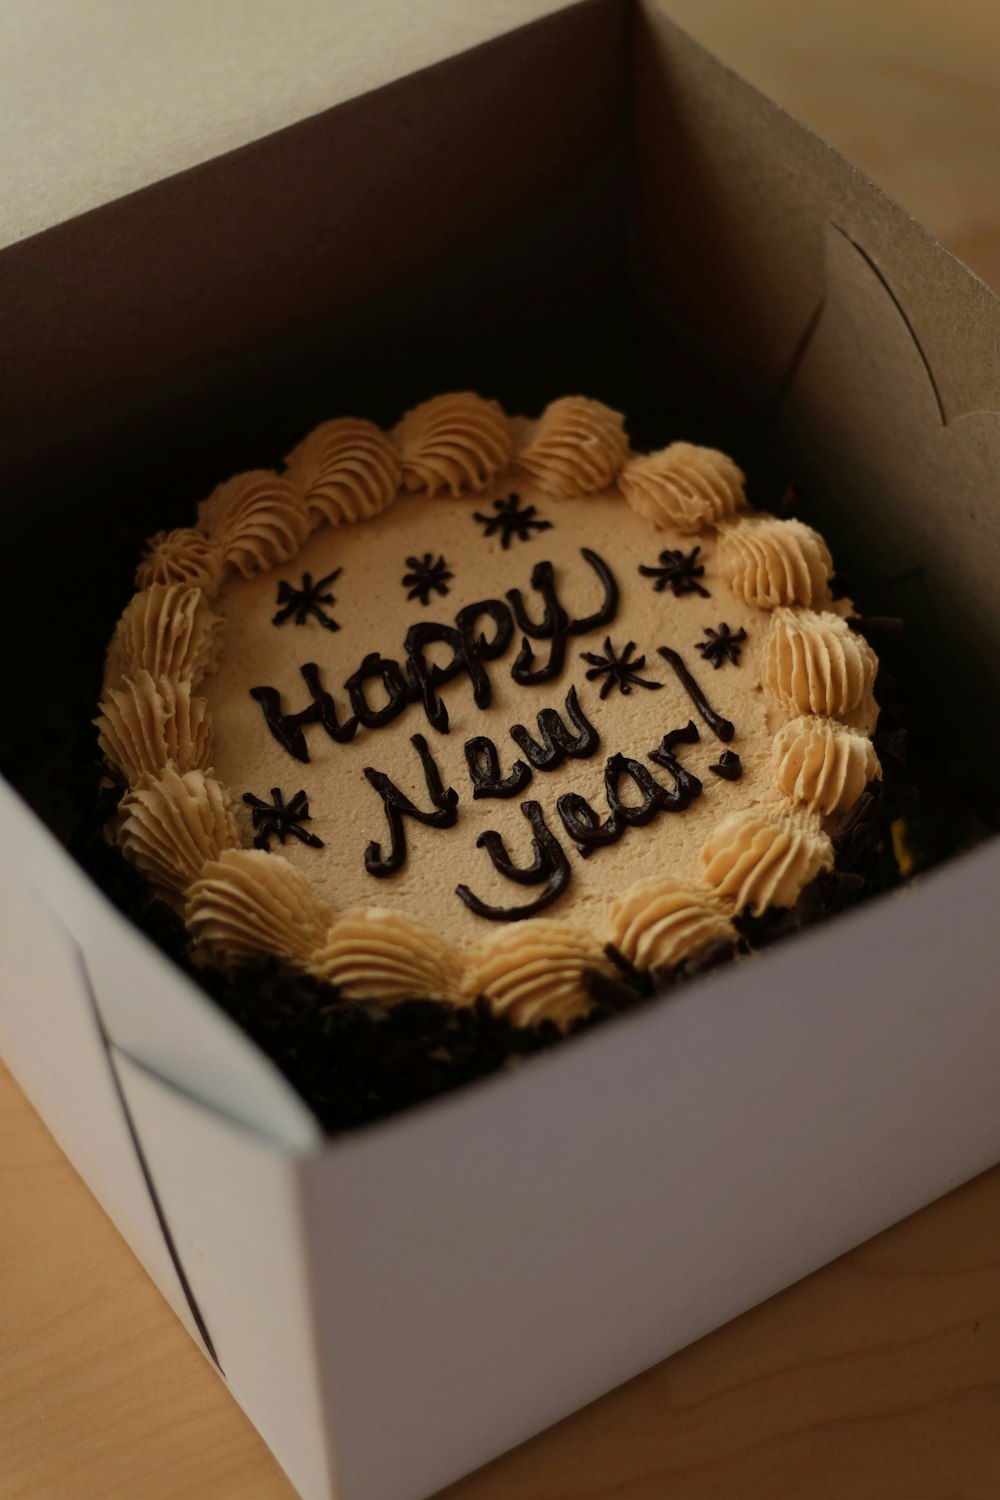 a happy new year cake in a box